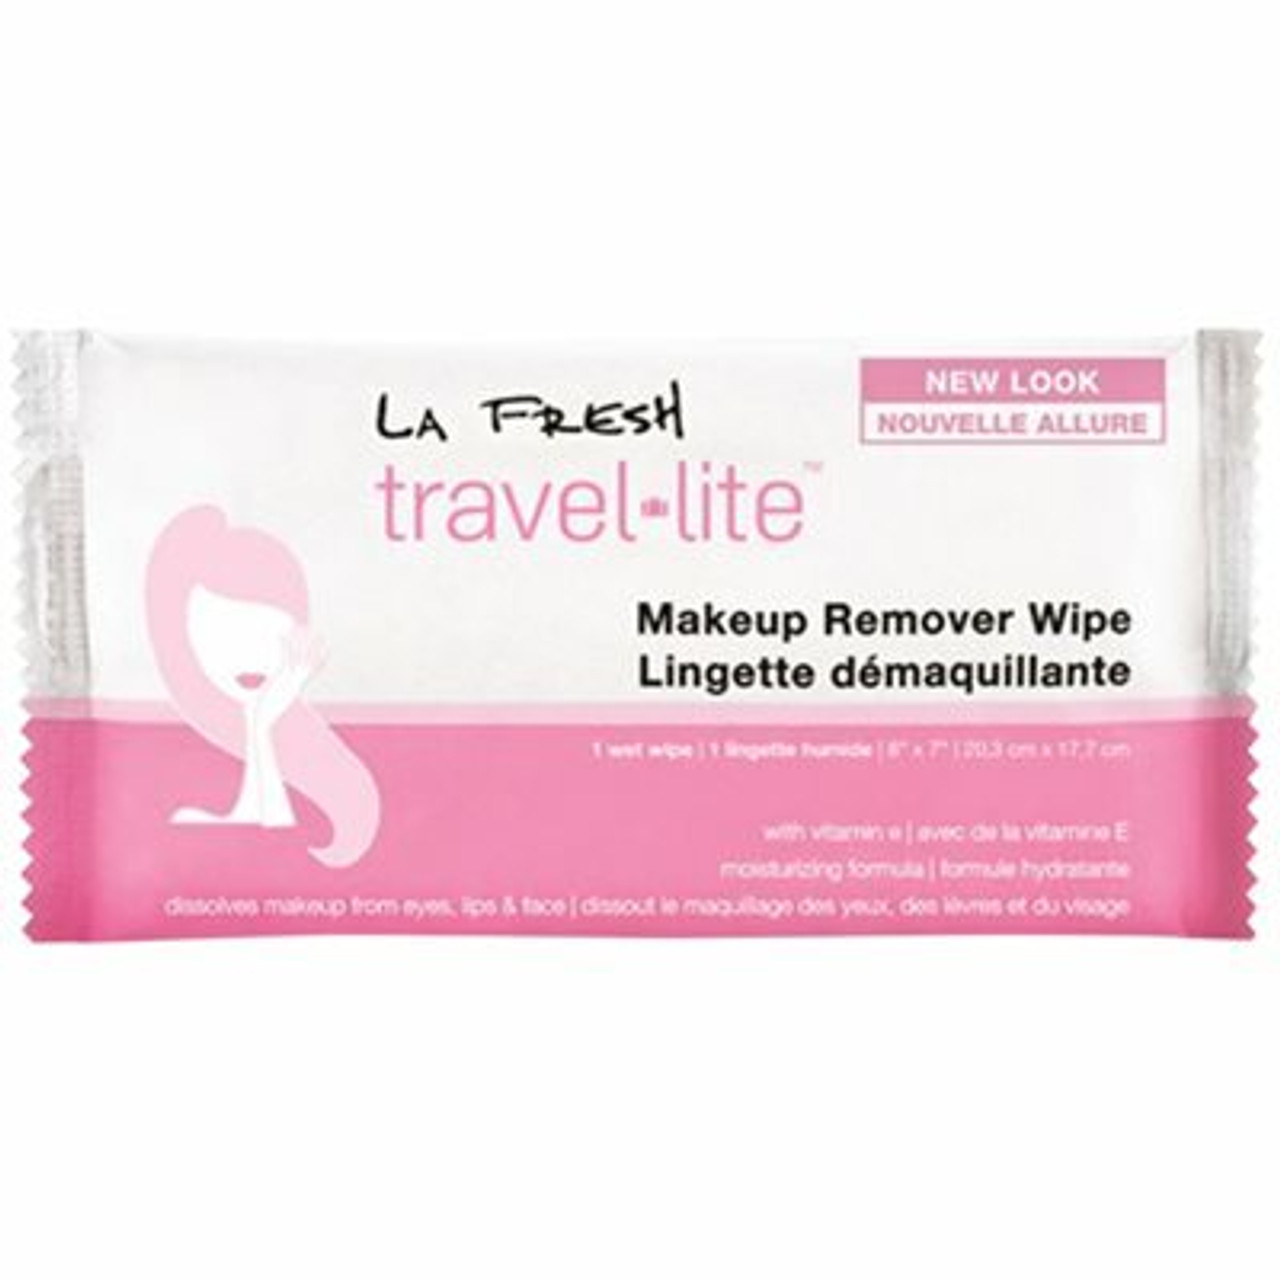 Amenity Services Makeup Remover Wipes (200-Case)